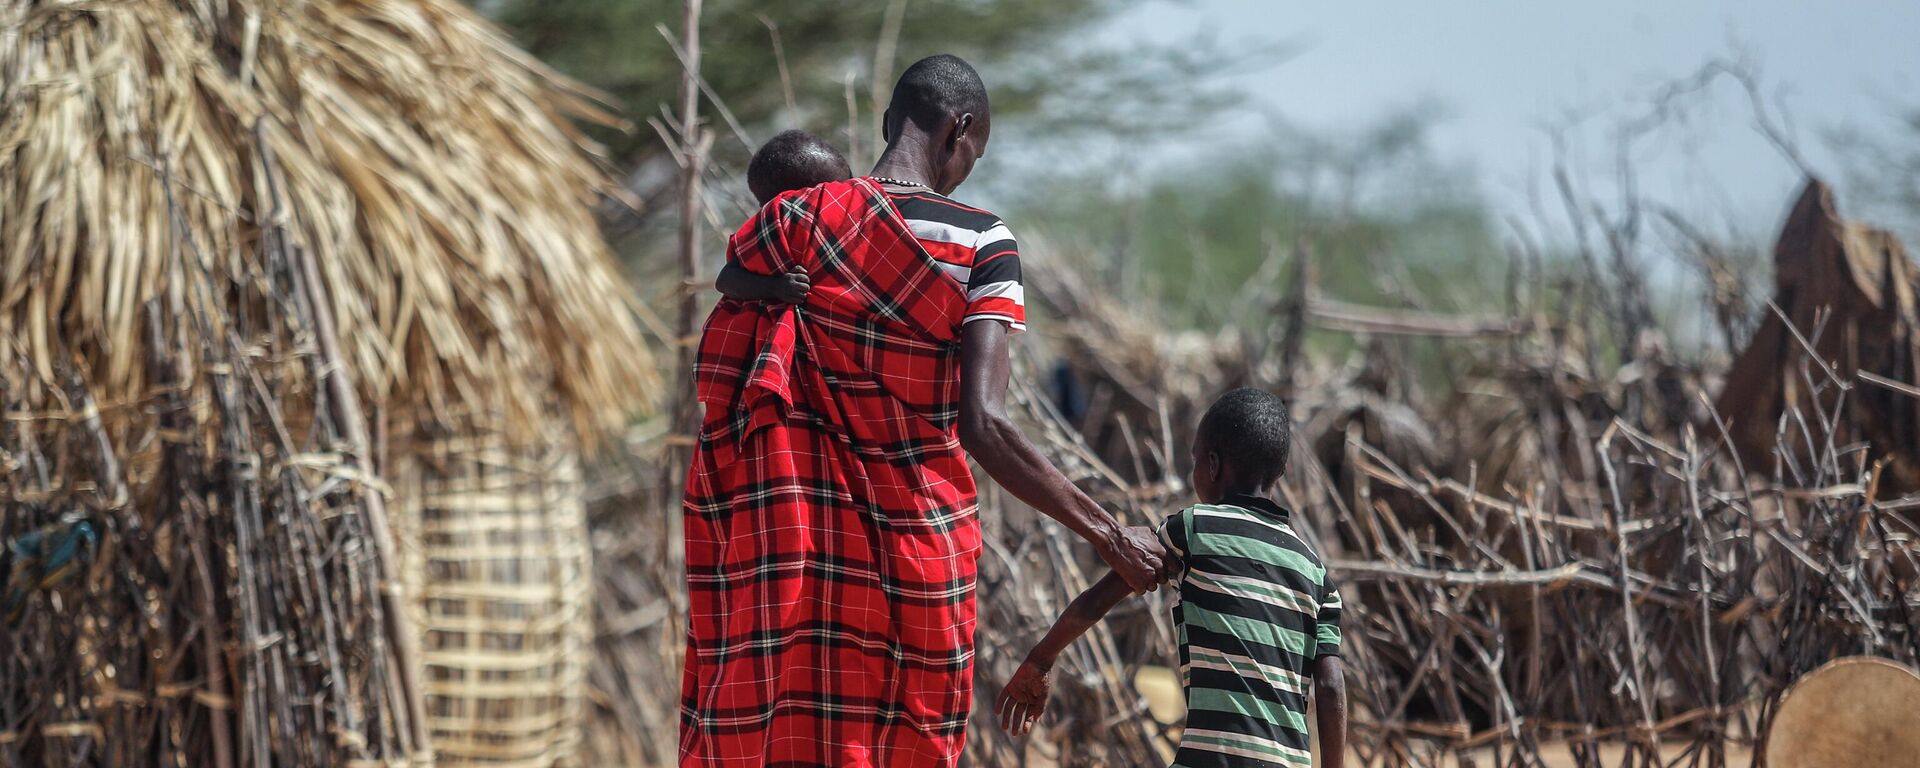 A father helps his malnourished son to walk near their hut in the village of Lomoputh in northern Kenya Thursday, May 12, 2022. United Nations Under-Secretary-General for Humanitarian Affairs Martin Griffiths visited the area on Thurs - Sputnik International, 1920, 19.08.2022